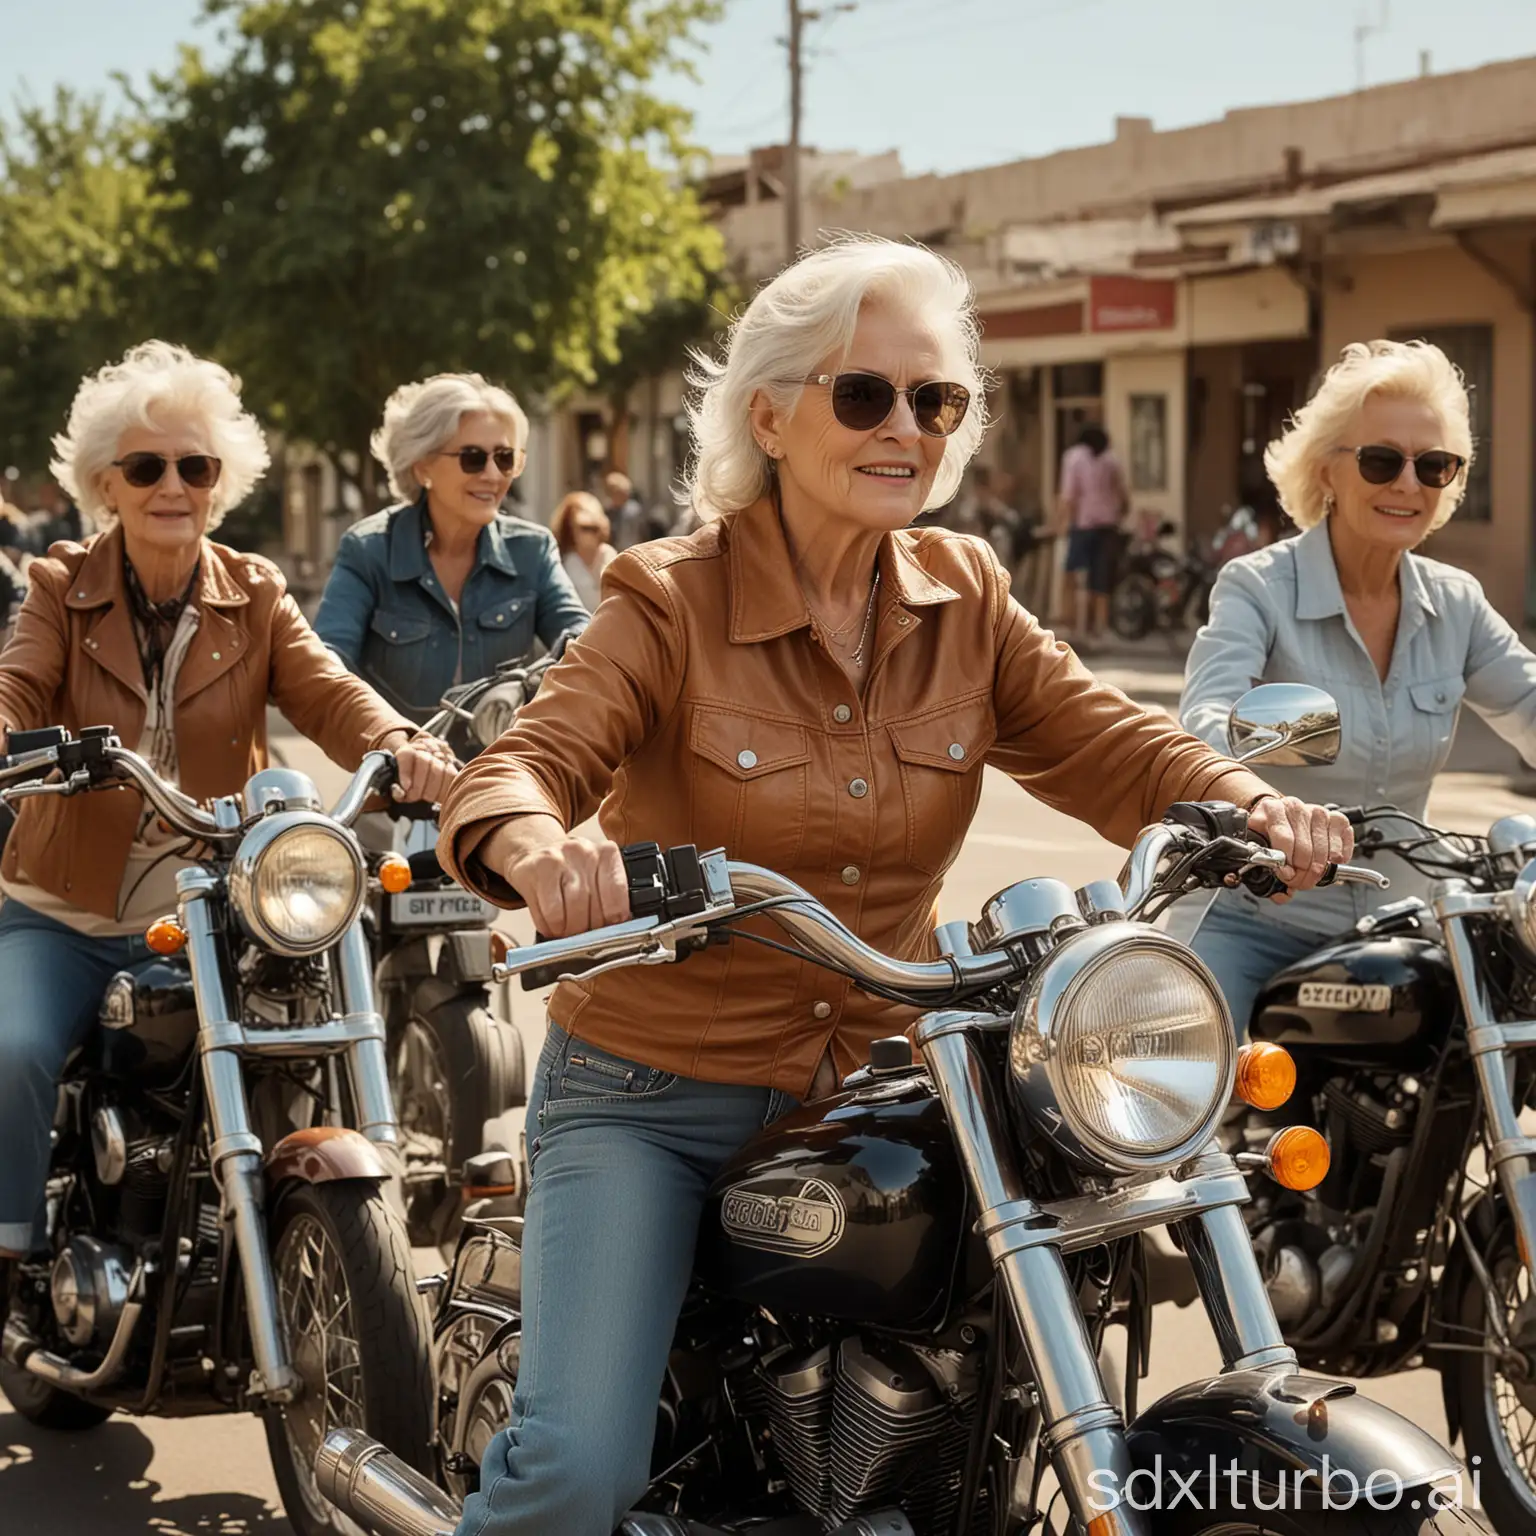 Group-of-Mature-Women-Riding-Motorcycles-on-a-Sunny-Day